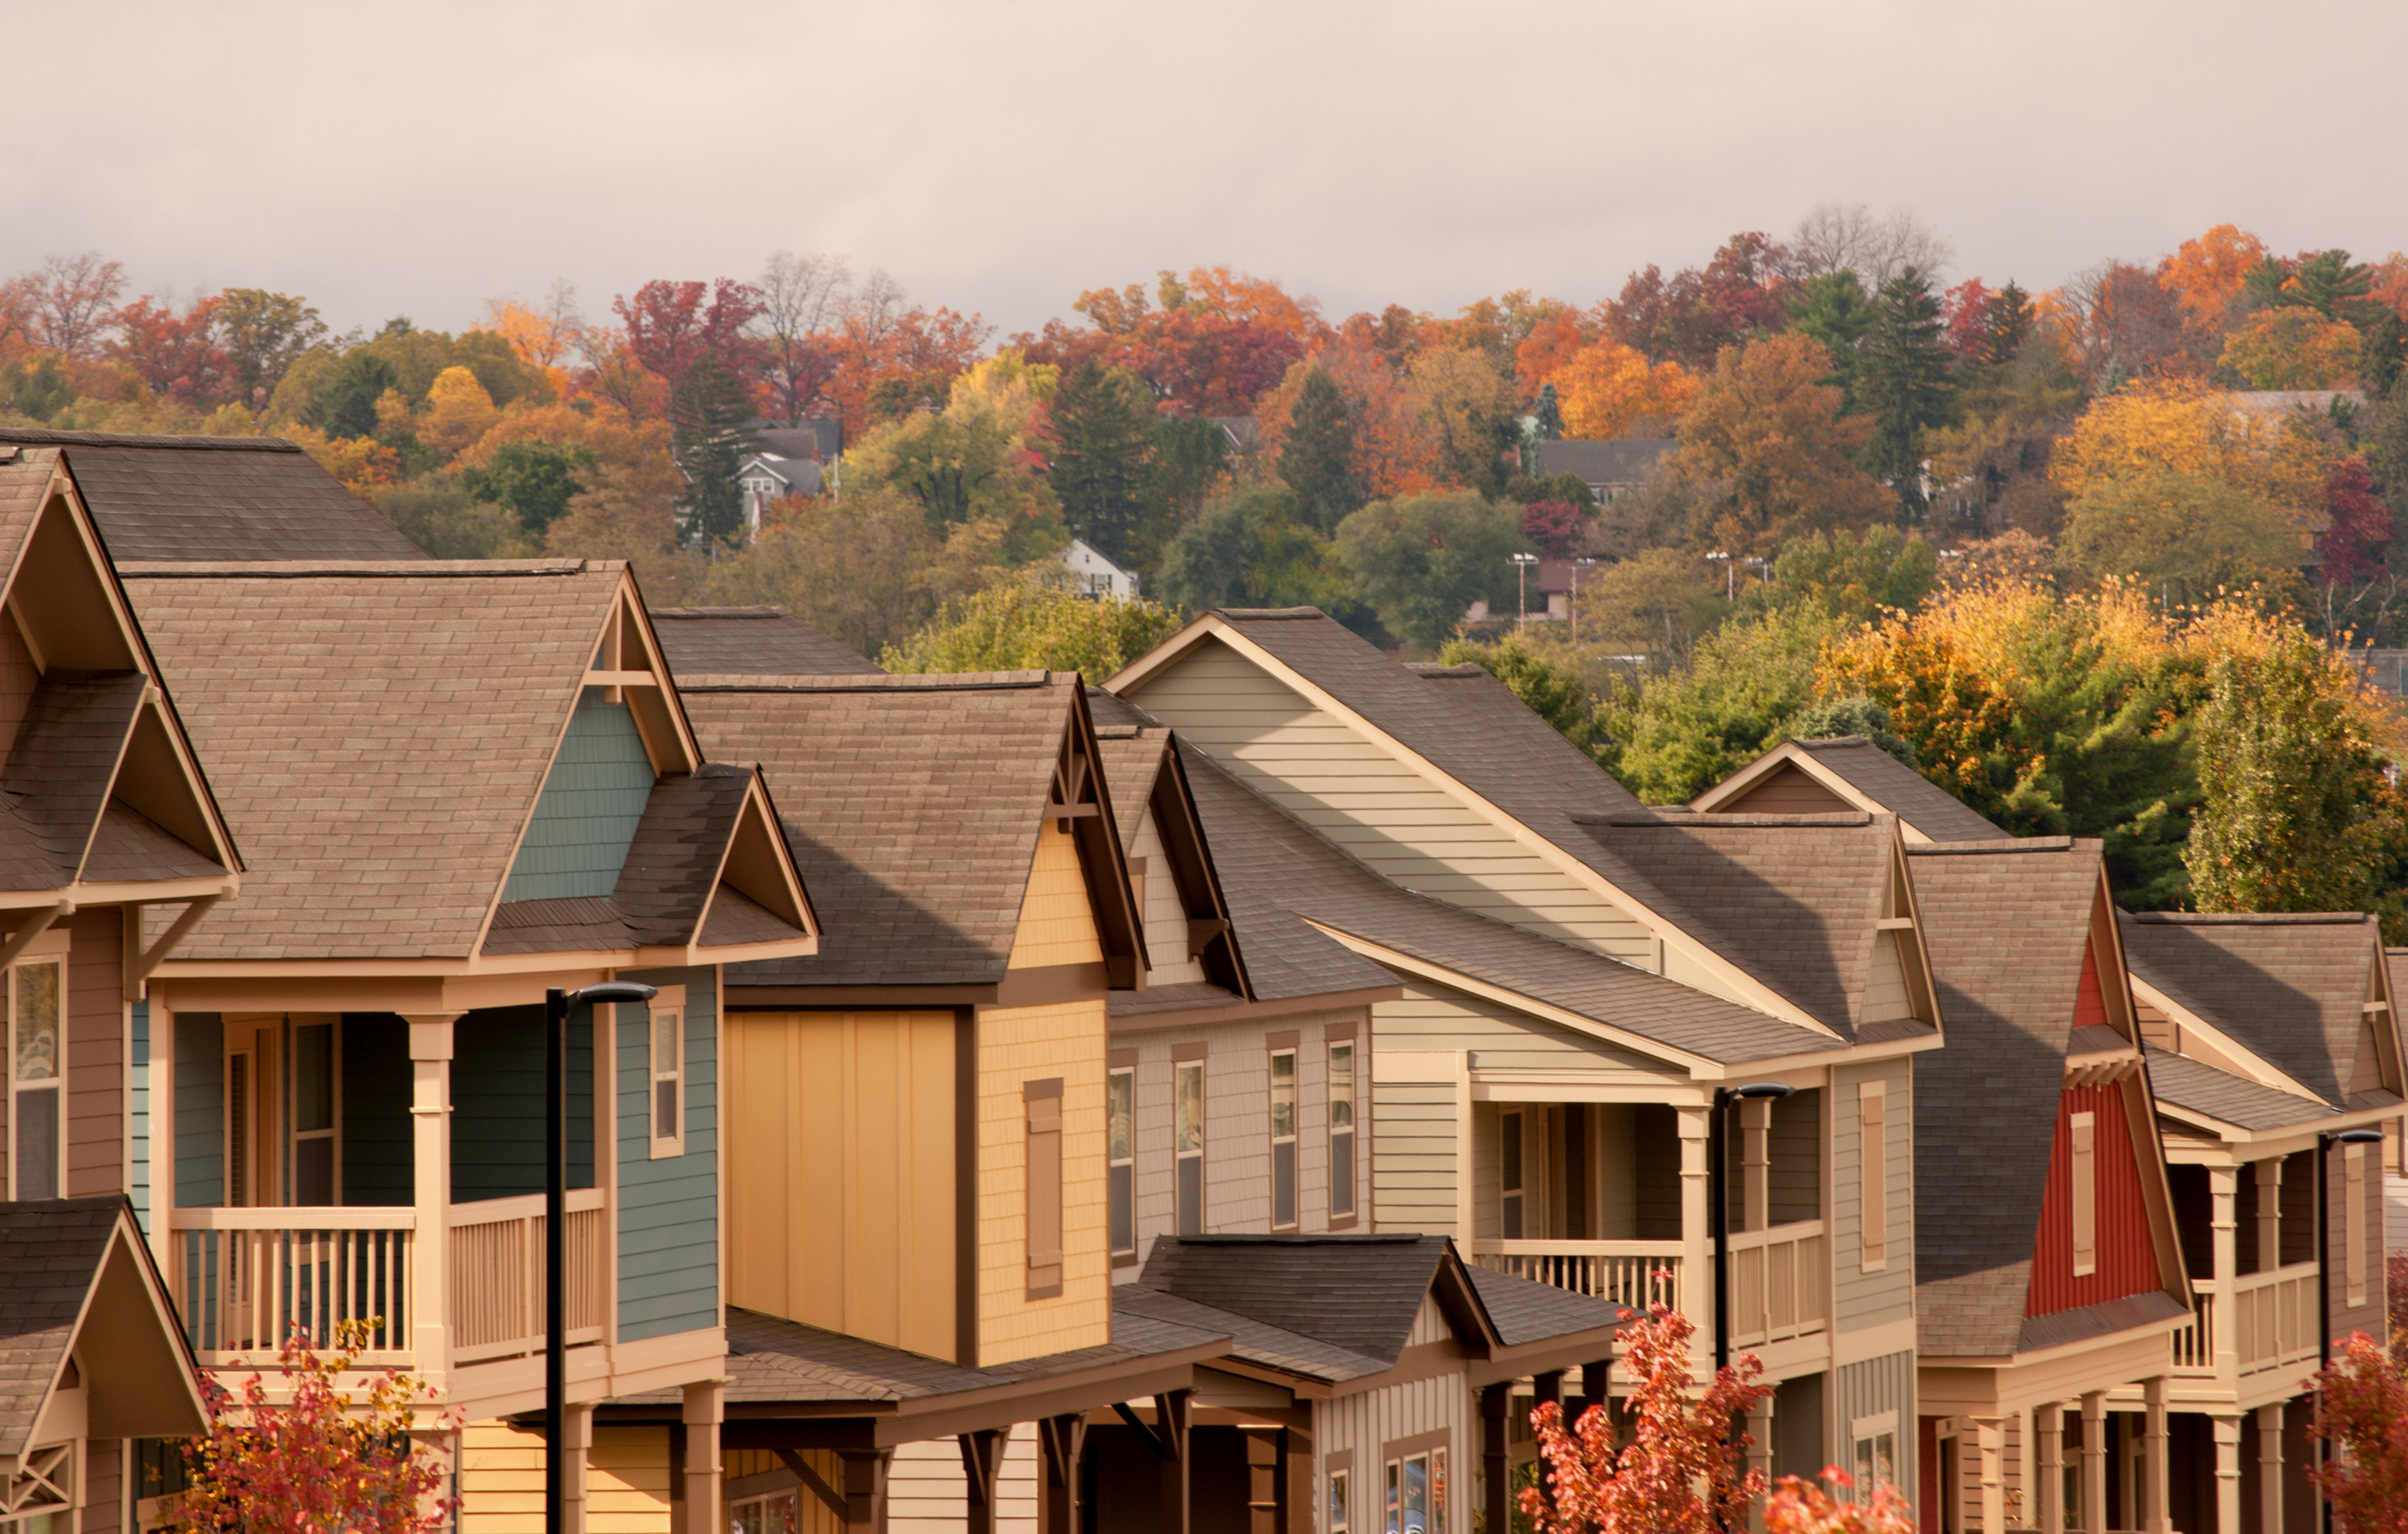 View of houses in State College, Pennsylvanie=a